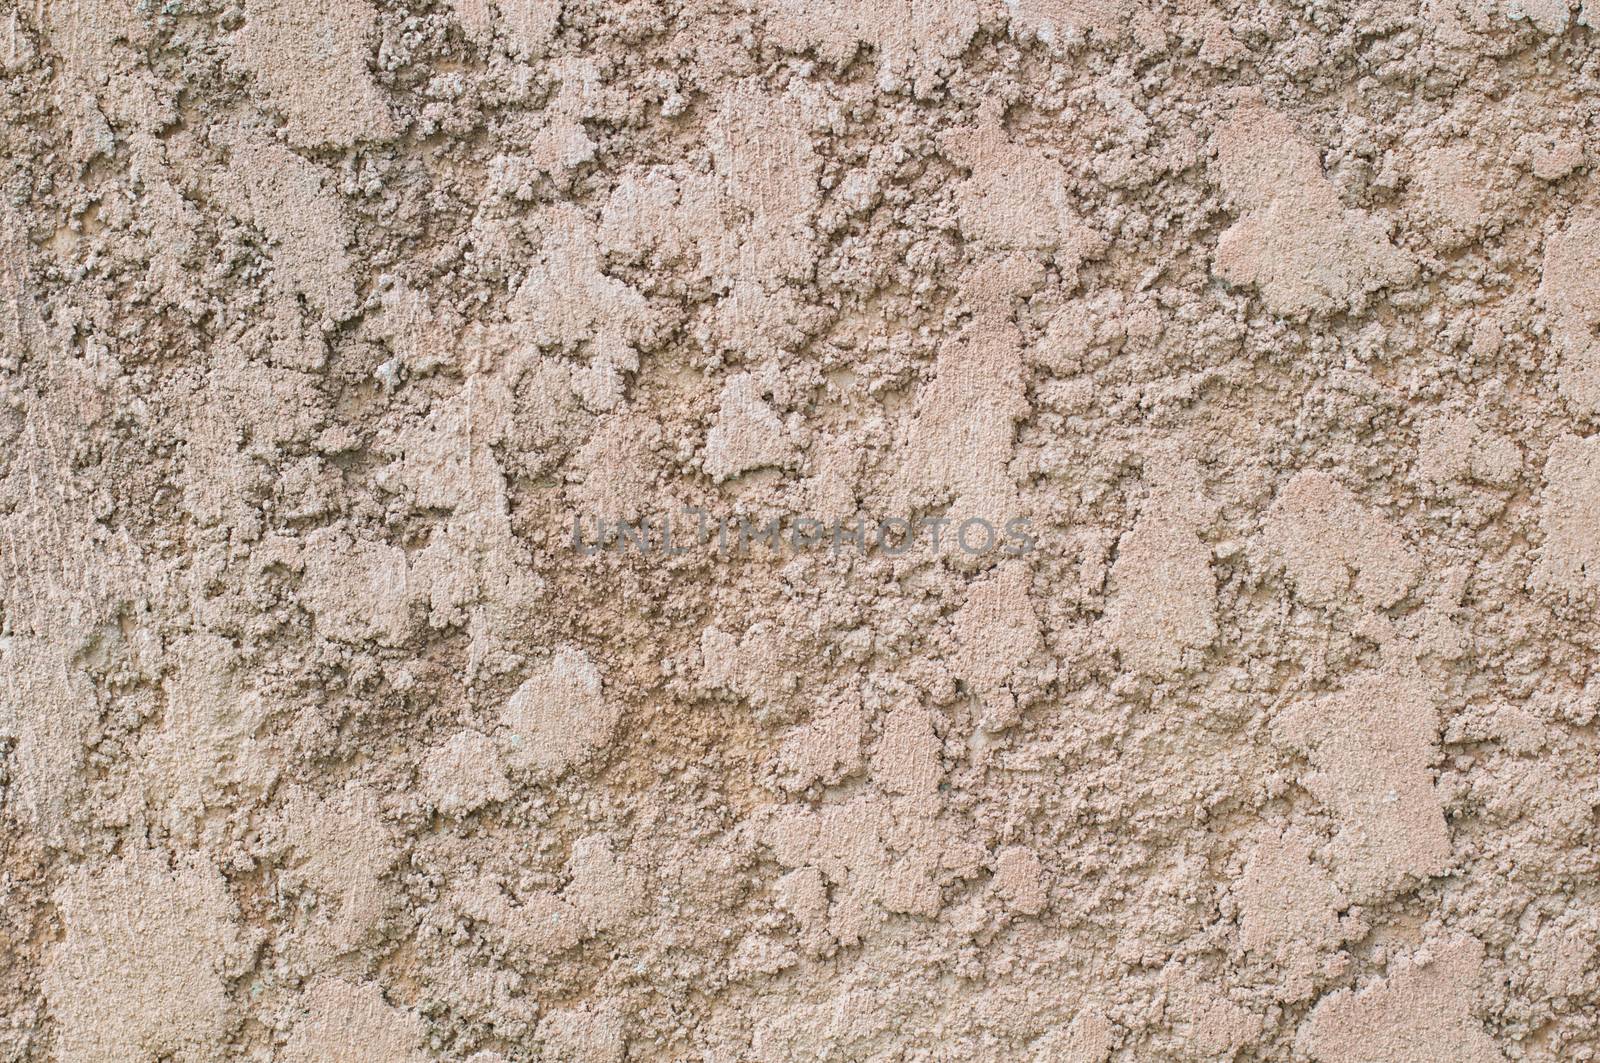 Detailed concrete coarse rustic textured a background